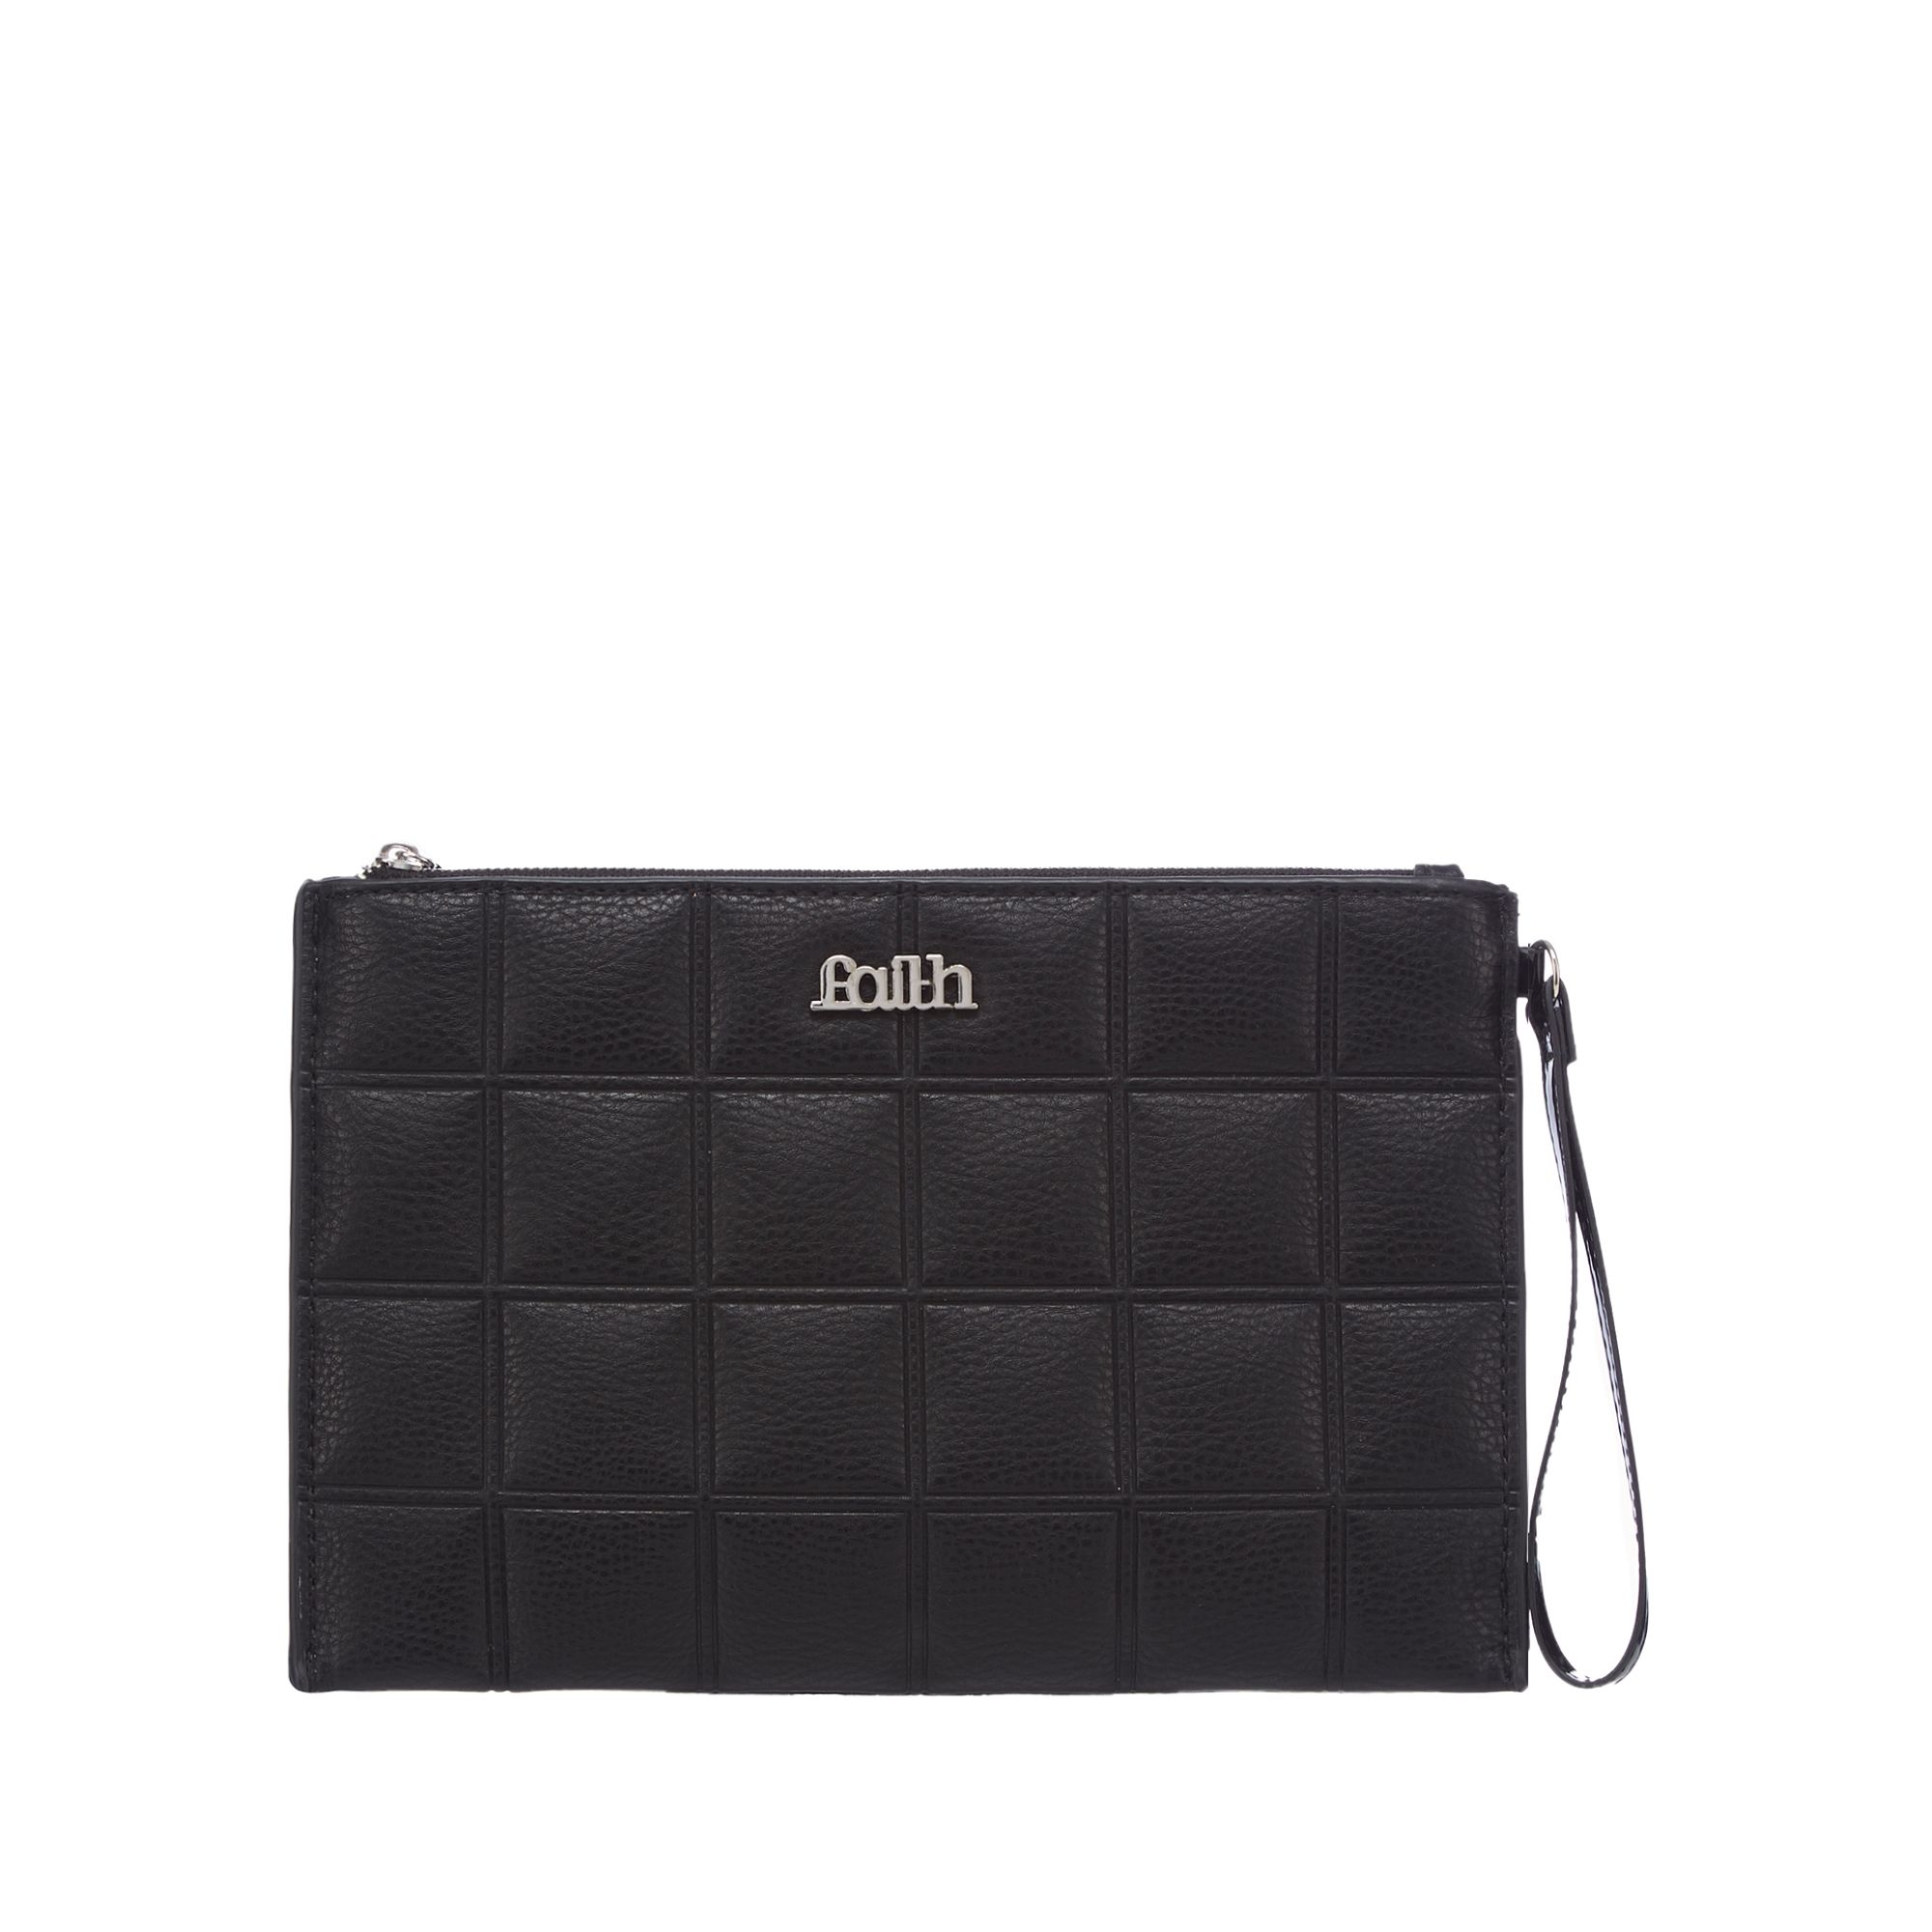 Faith Womens Black Quilted Square Clutch Bag From Debenhams | eBay